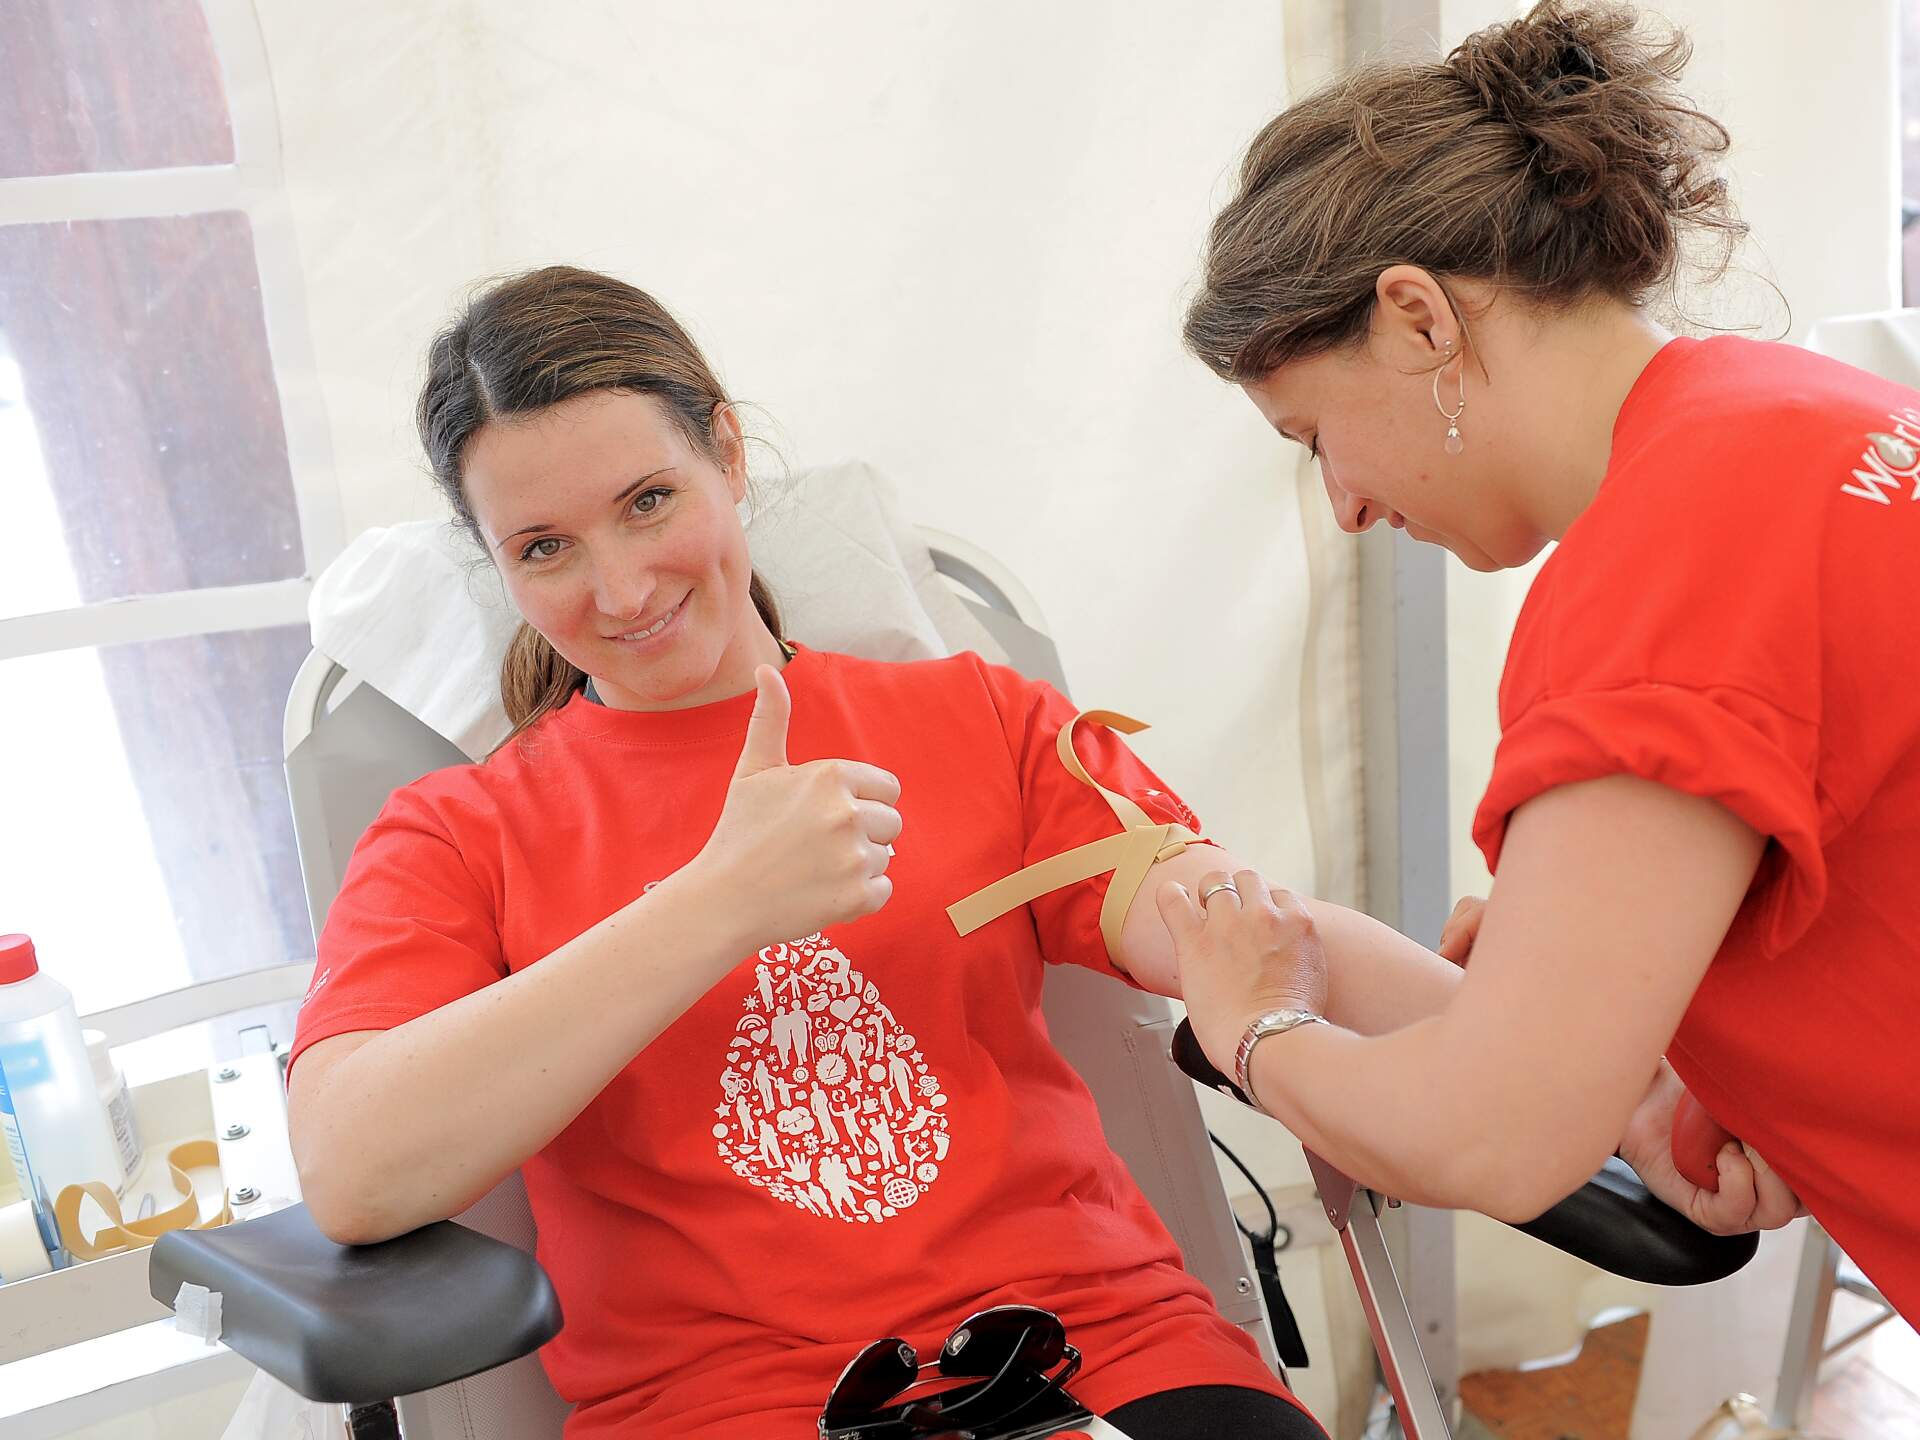 A woman is donating blood and giving a thumbs up whilst smiling